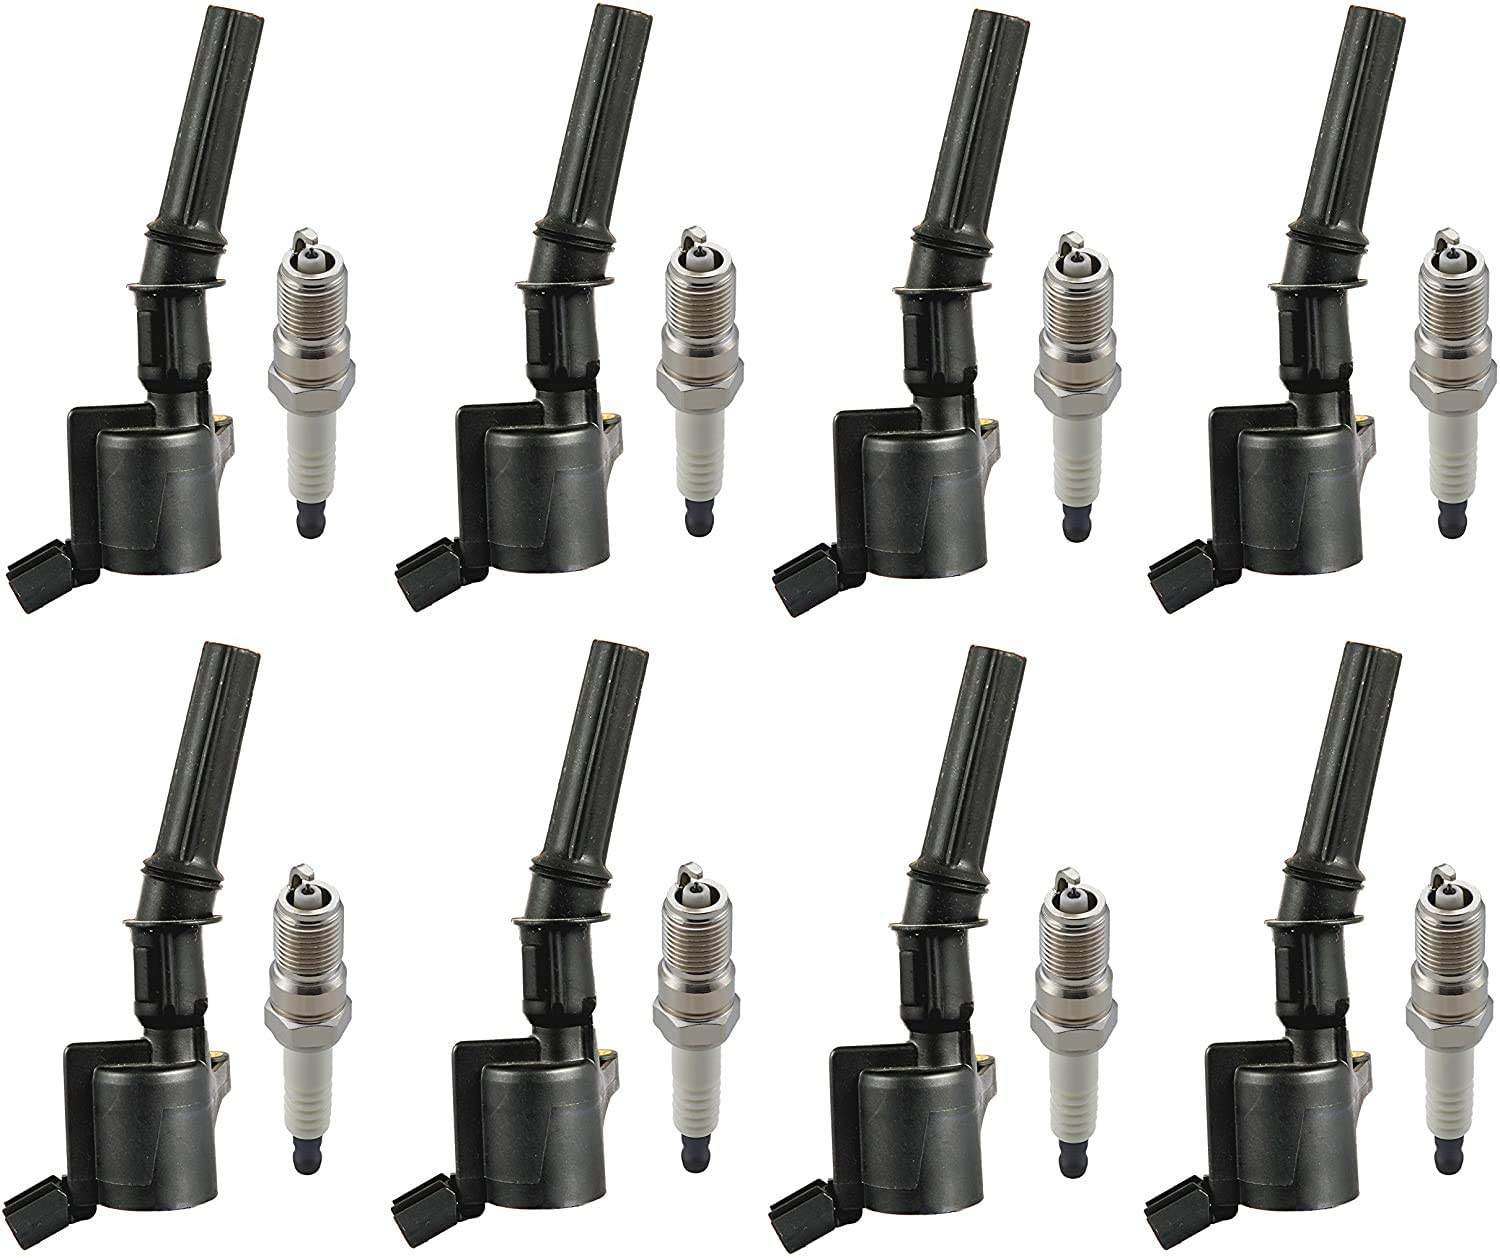 ENA Set of 8 Platinum Spark Plugs and 8 Ignition Coils compatible with 1997-2011 compatible with Ford Crown Victoria Mercury Grand Marquis Lincoln Town Car E-150 4.6L V8 FD503 SP493